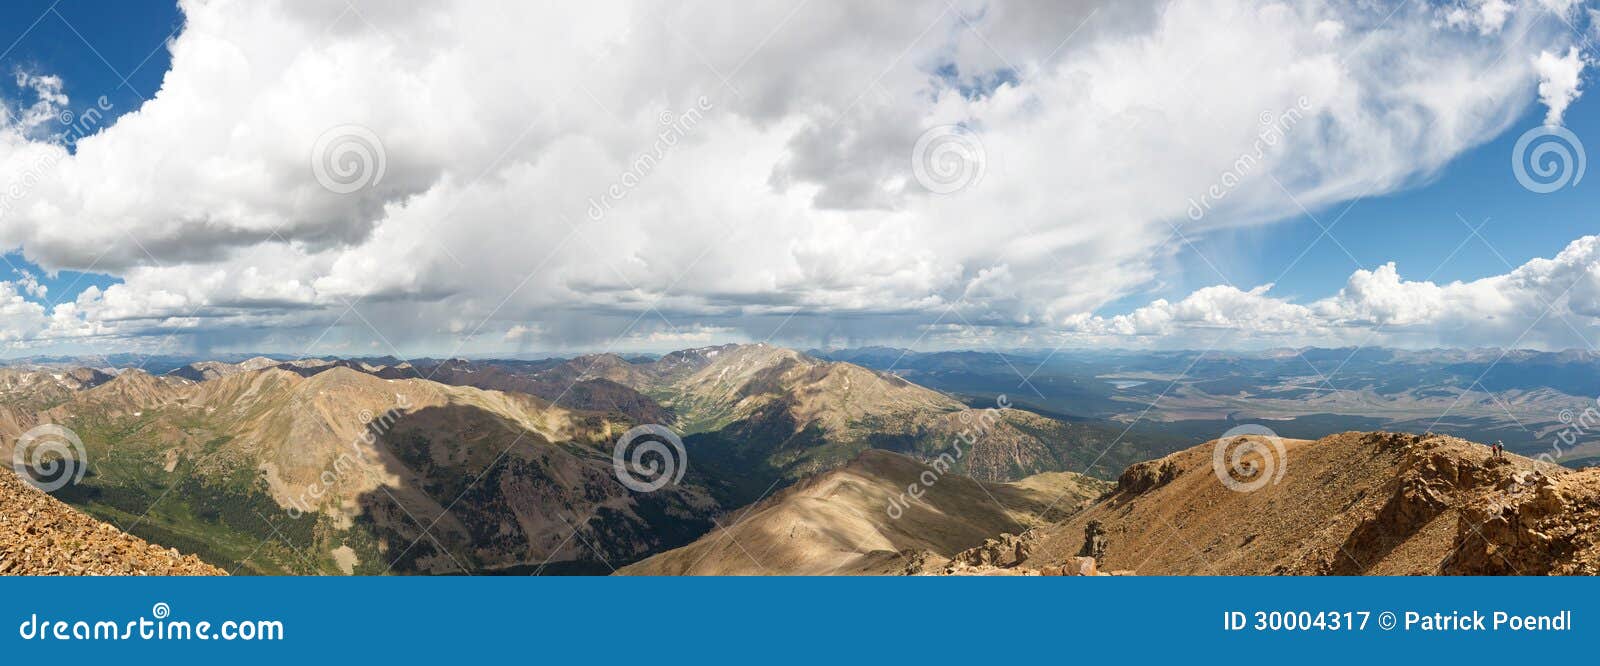 Rocky Mountains Panorama from Mount Elbert Stock Image - Image of ...